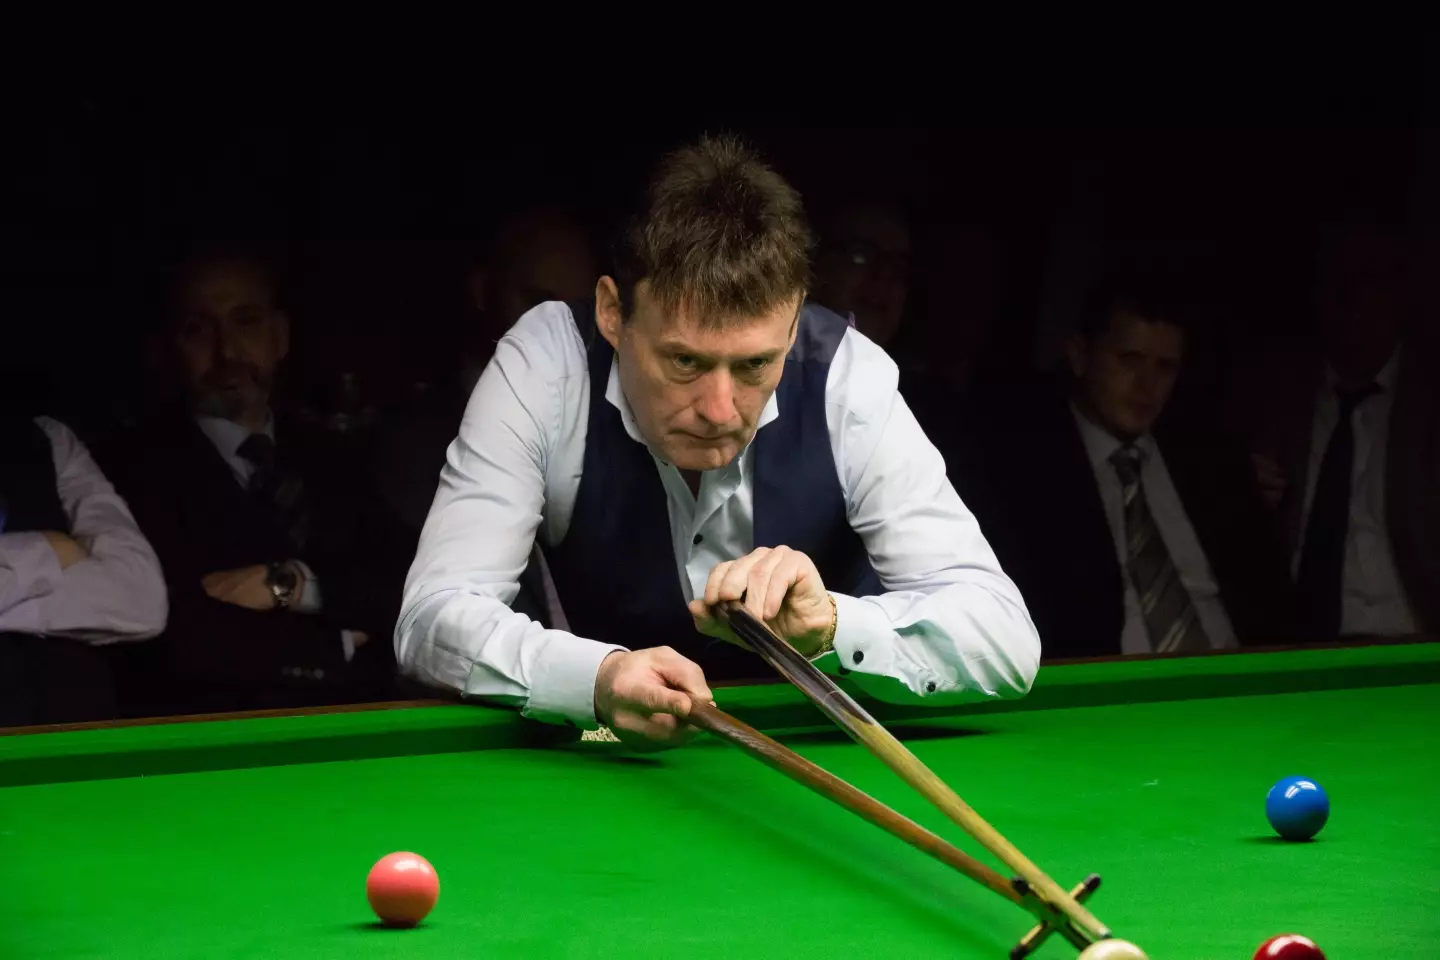 Snooker legend Jimmy White said a driver refused to take them after realising that his brother, Martin, had passed away.